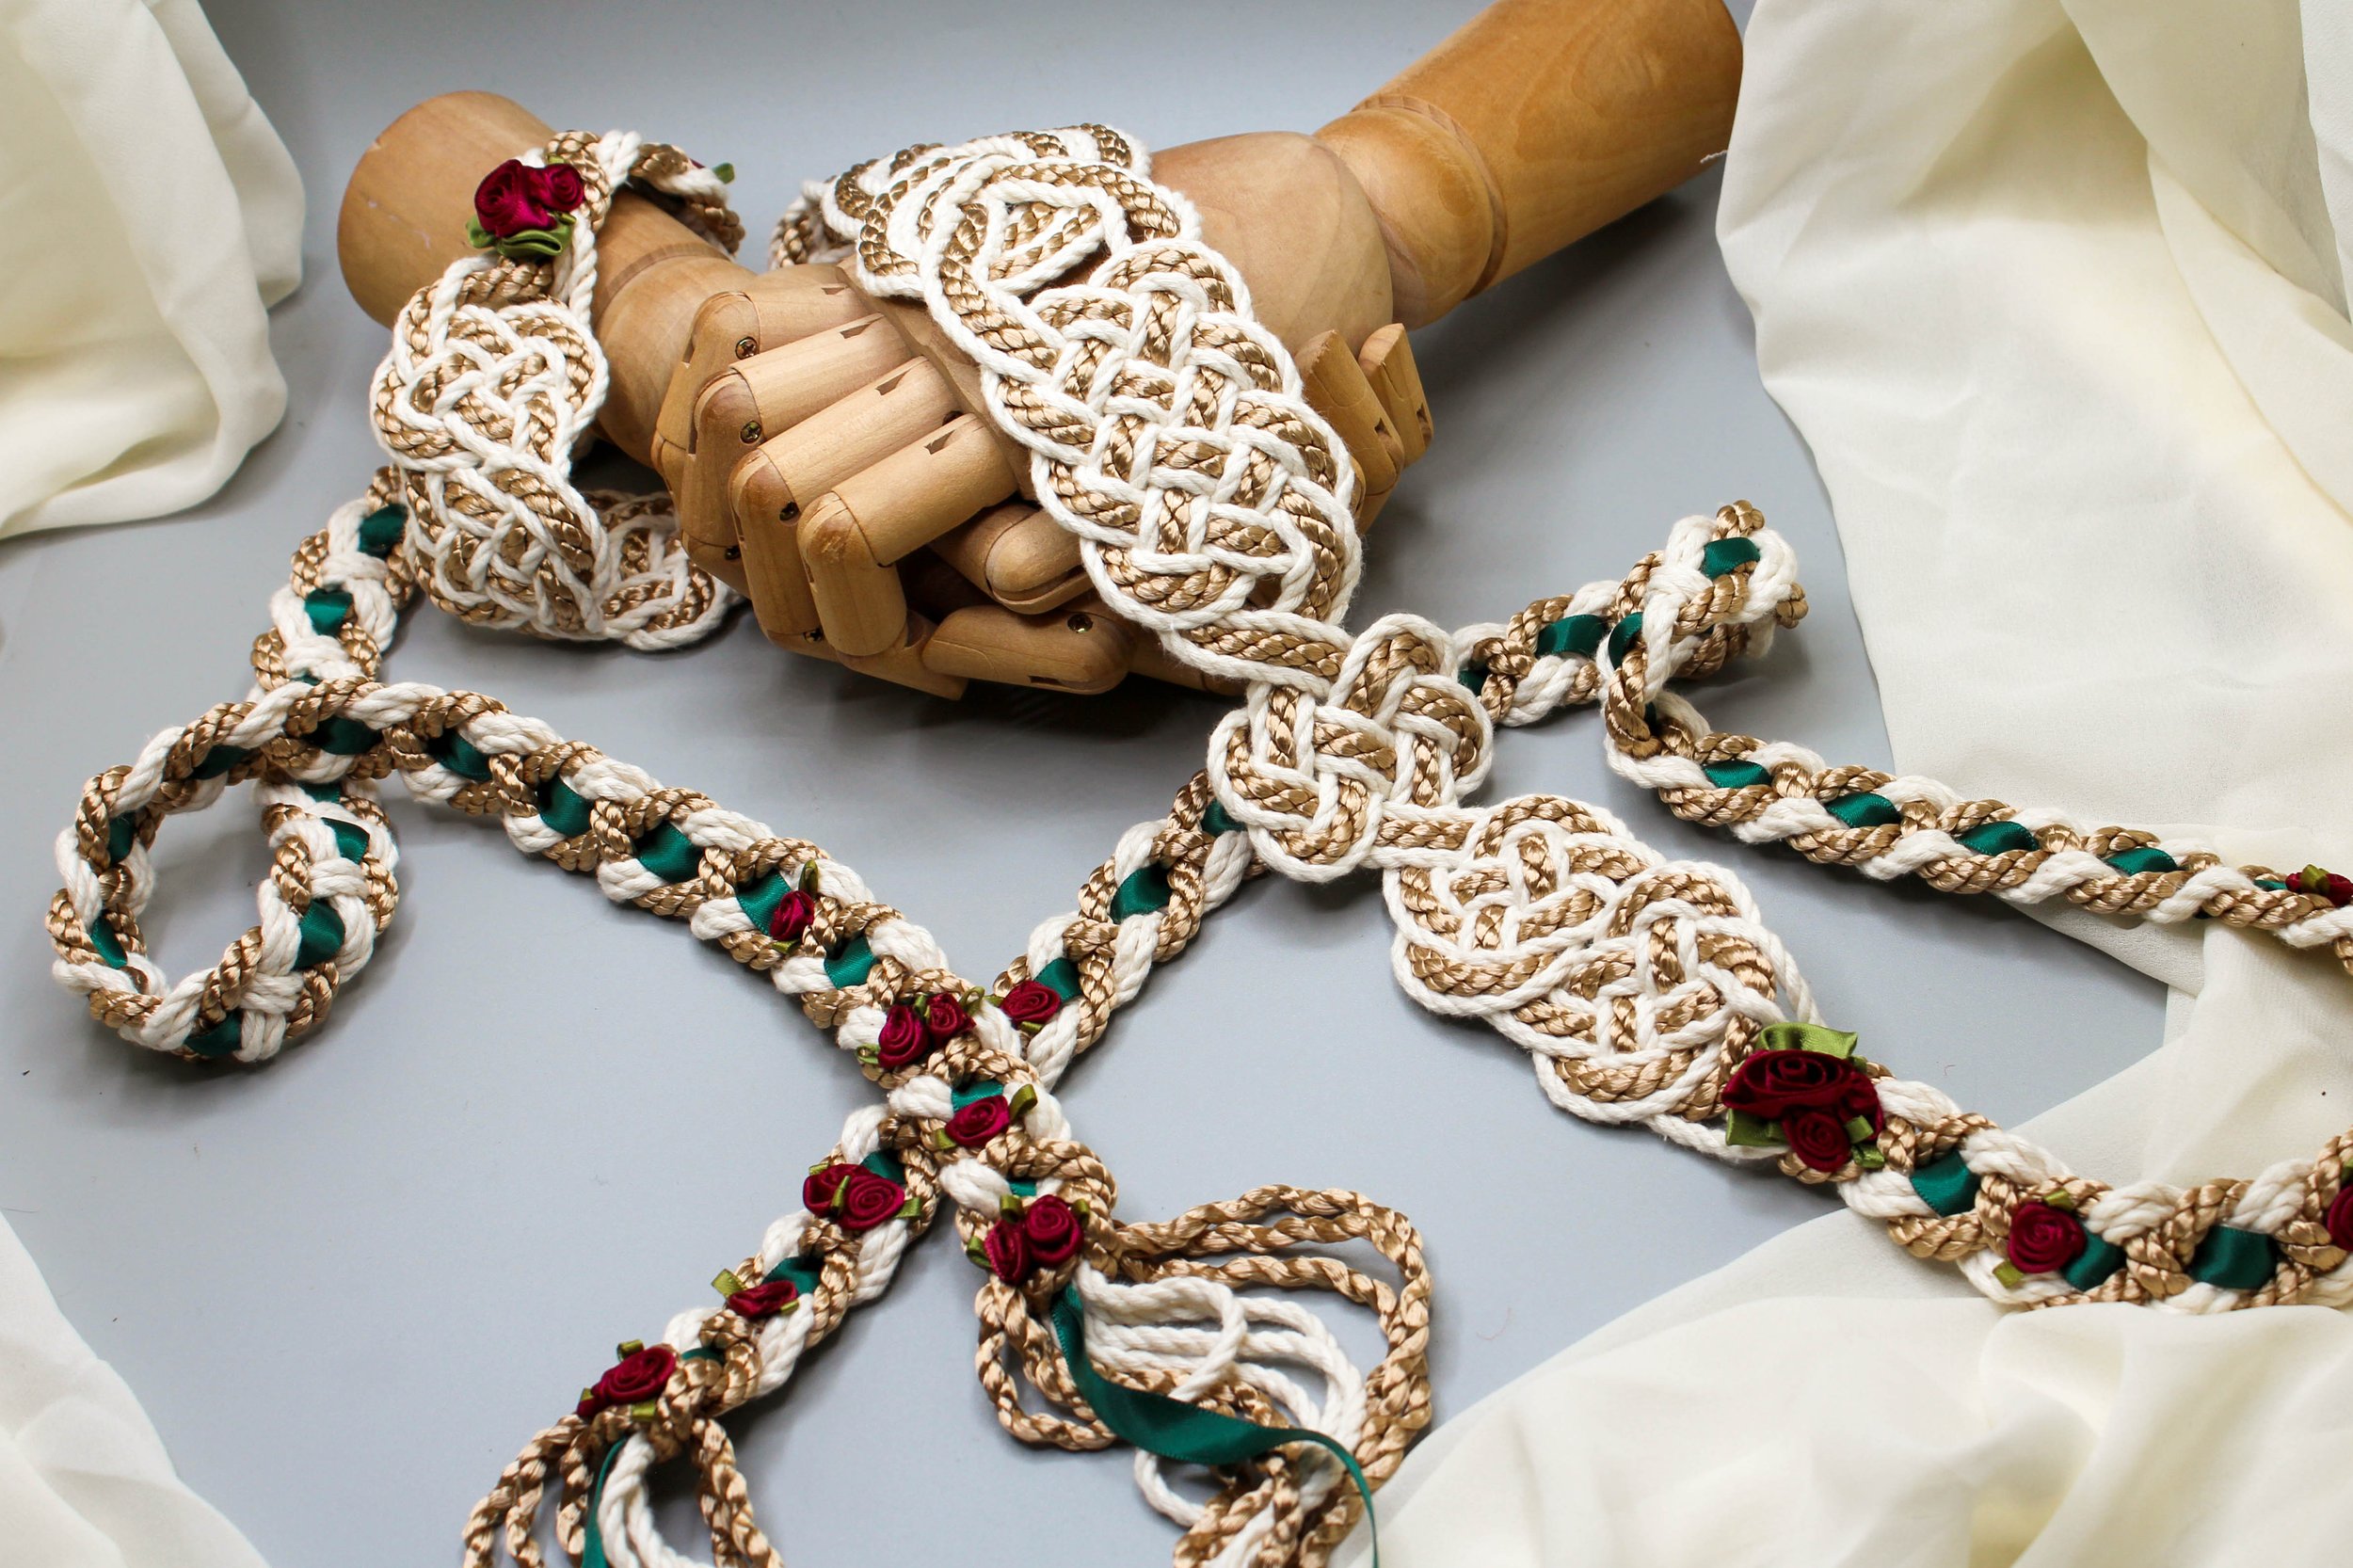 Meaning and symbolism of handfasting knots — Ceotha - handfasting Cords